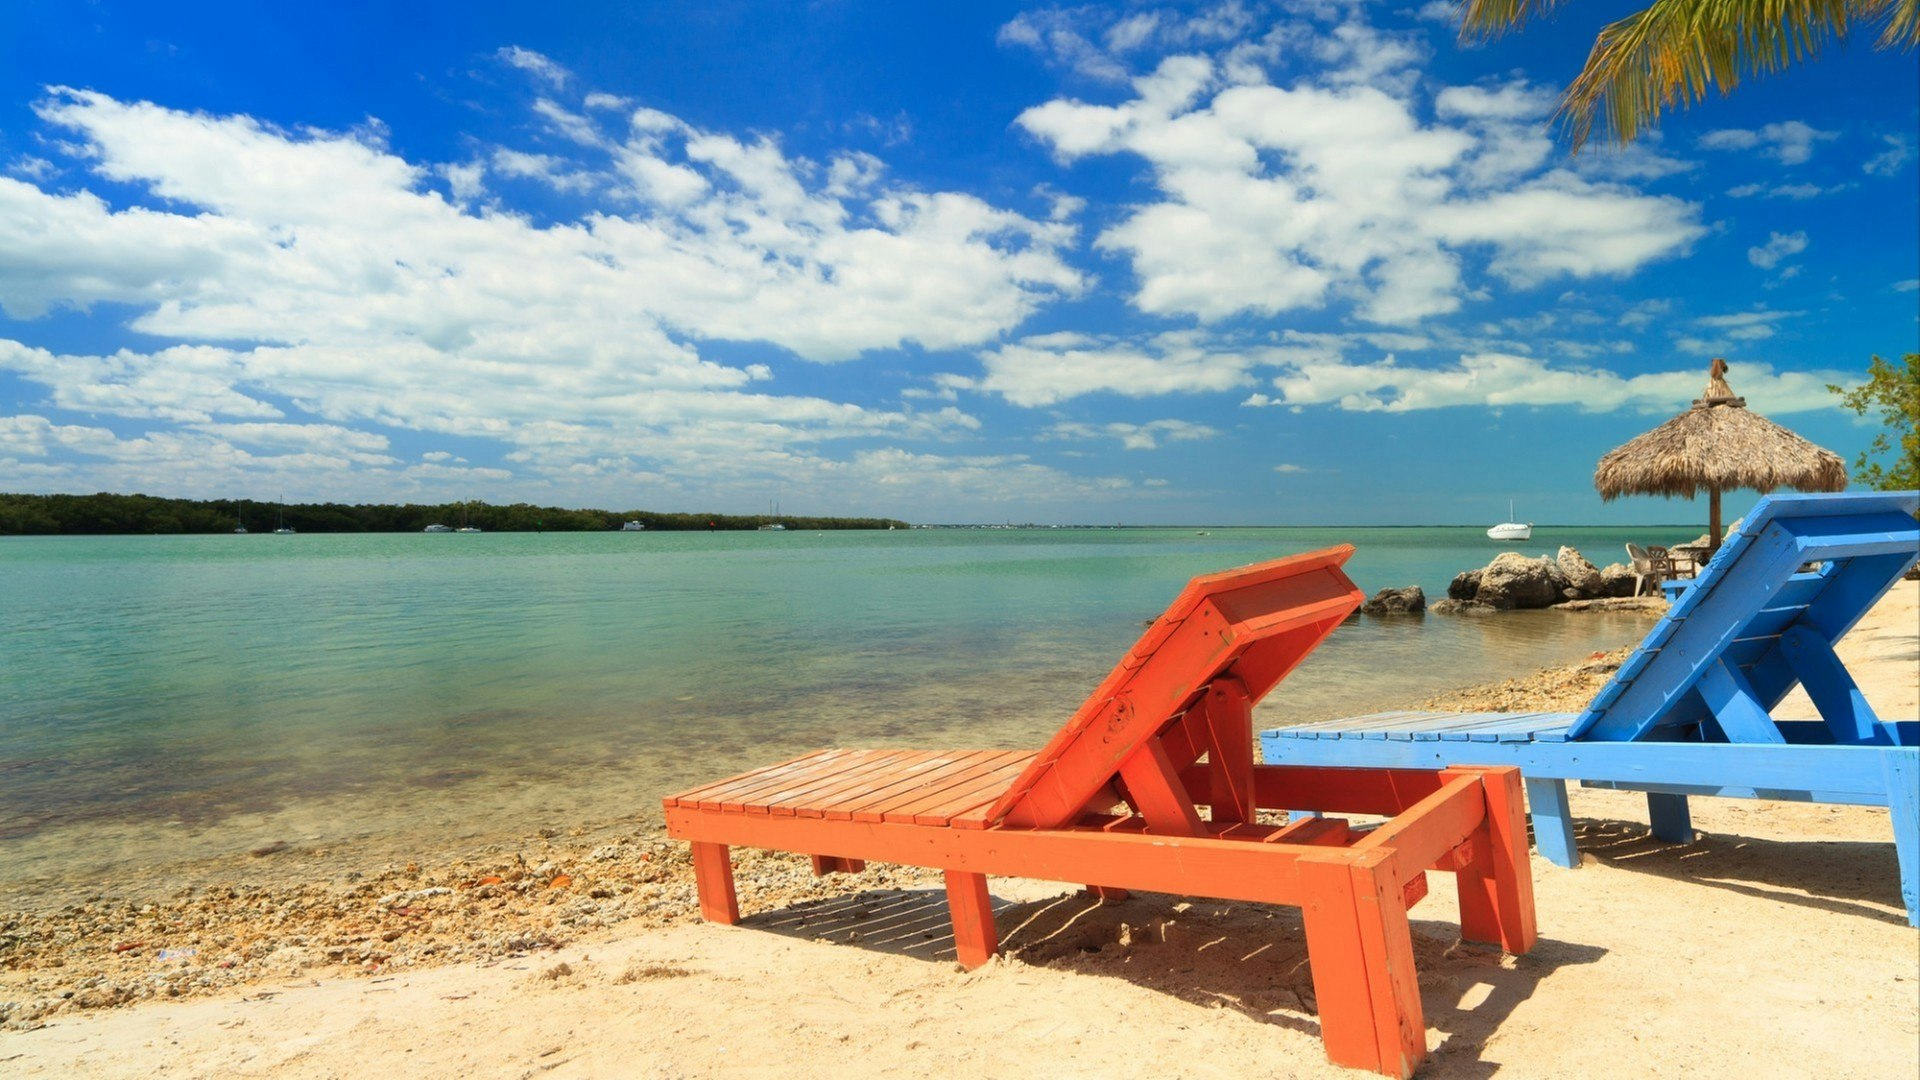 Wooden beach lounge chairs along the shoreline of the Florida Keys with pretty blue sky and clouds and thatched hut in the background.